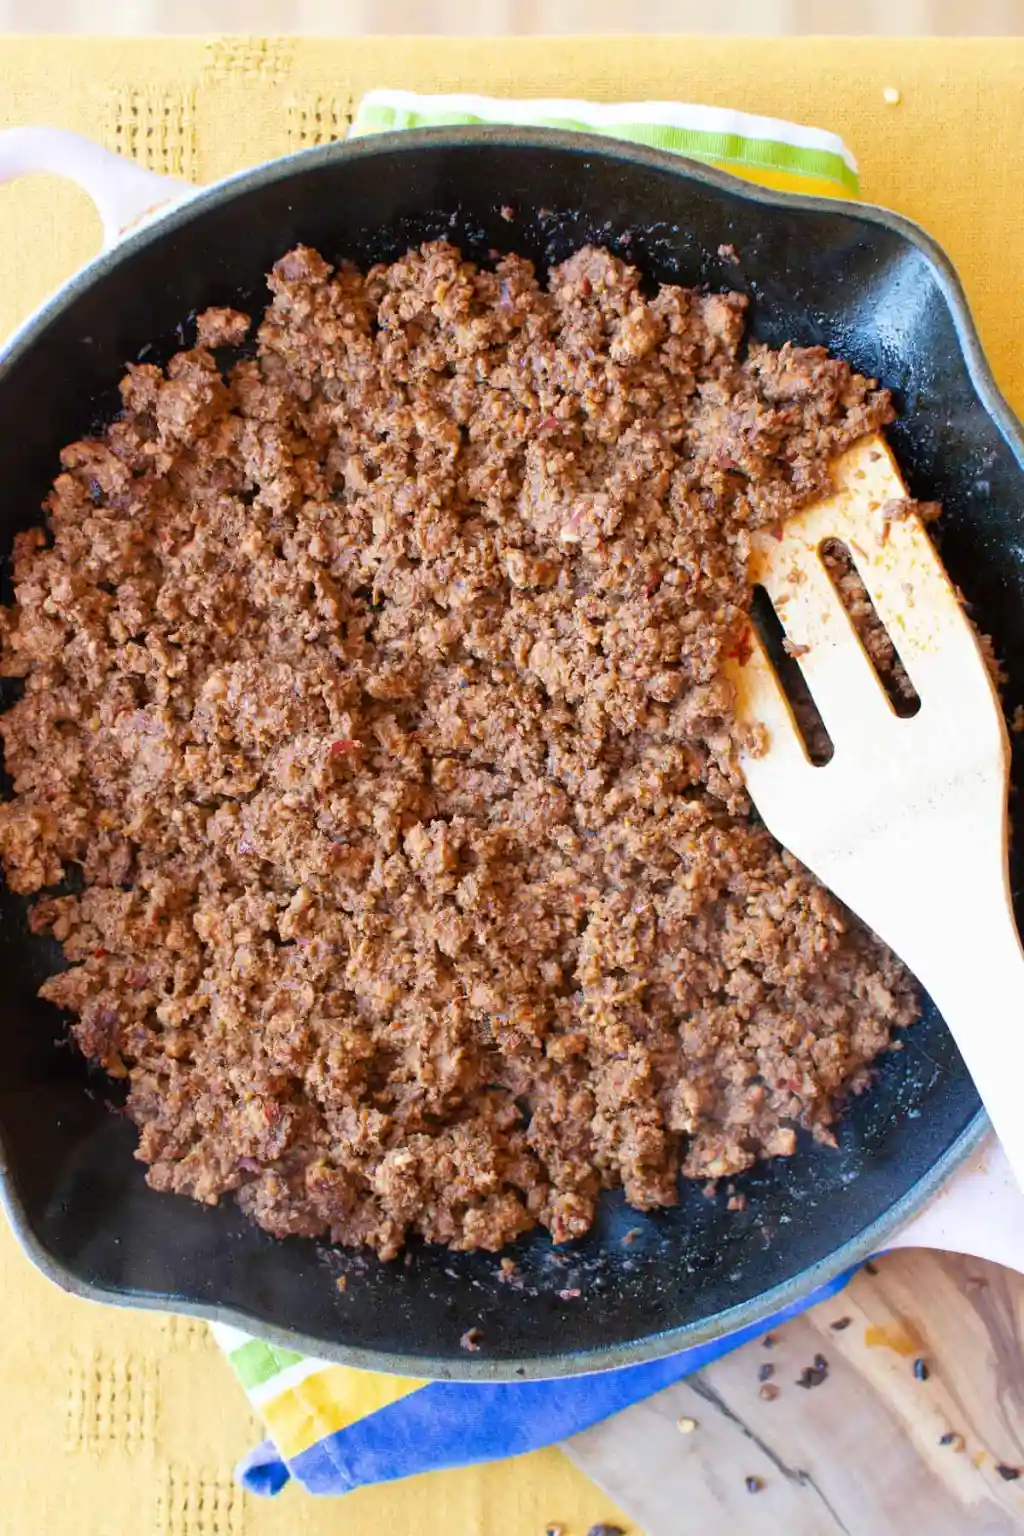 red chile powder, recipes, large skillet, meat